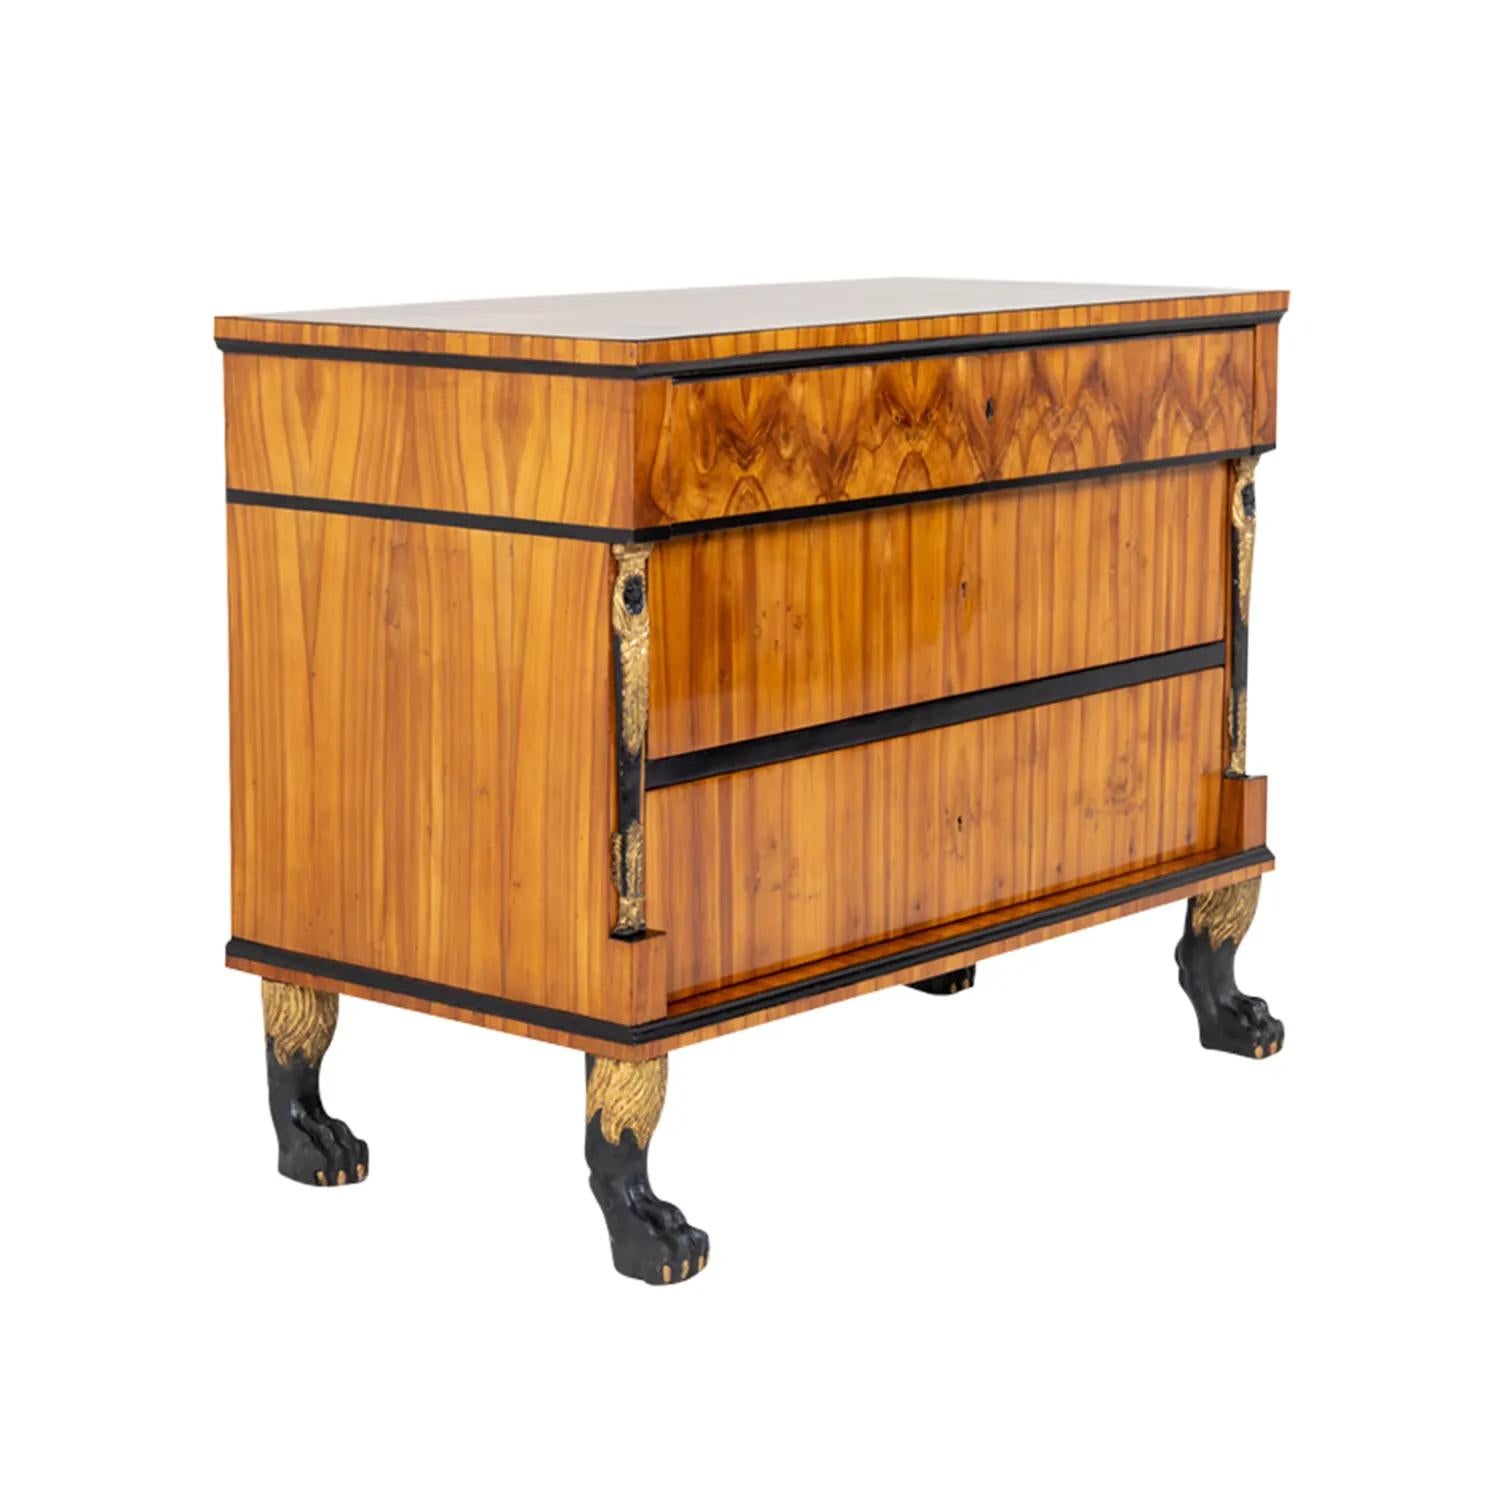 19th Century German Biedermeier Cherrywood Chest of Drawers - Antique Commode In Good Condition For Sale In West Palm Beach, FL